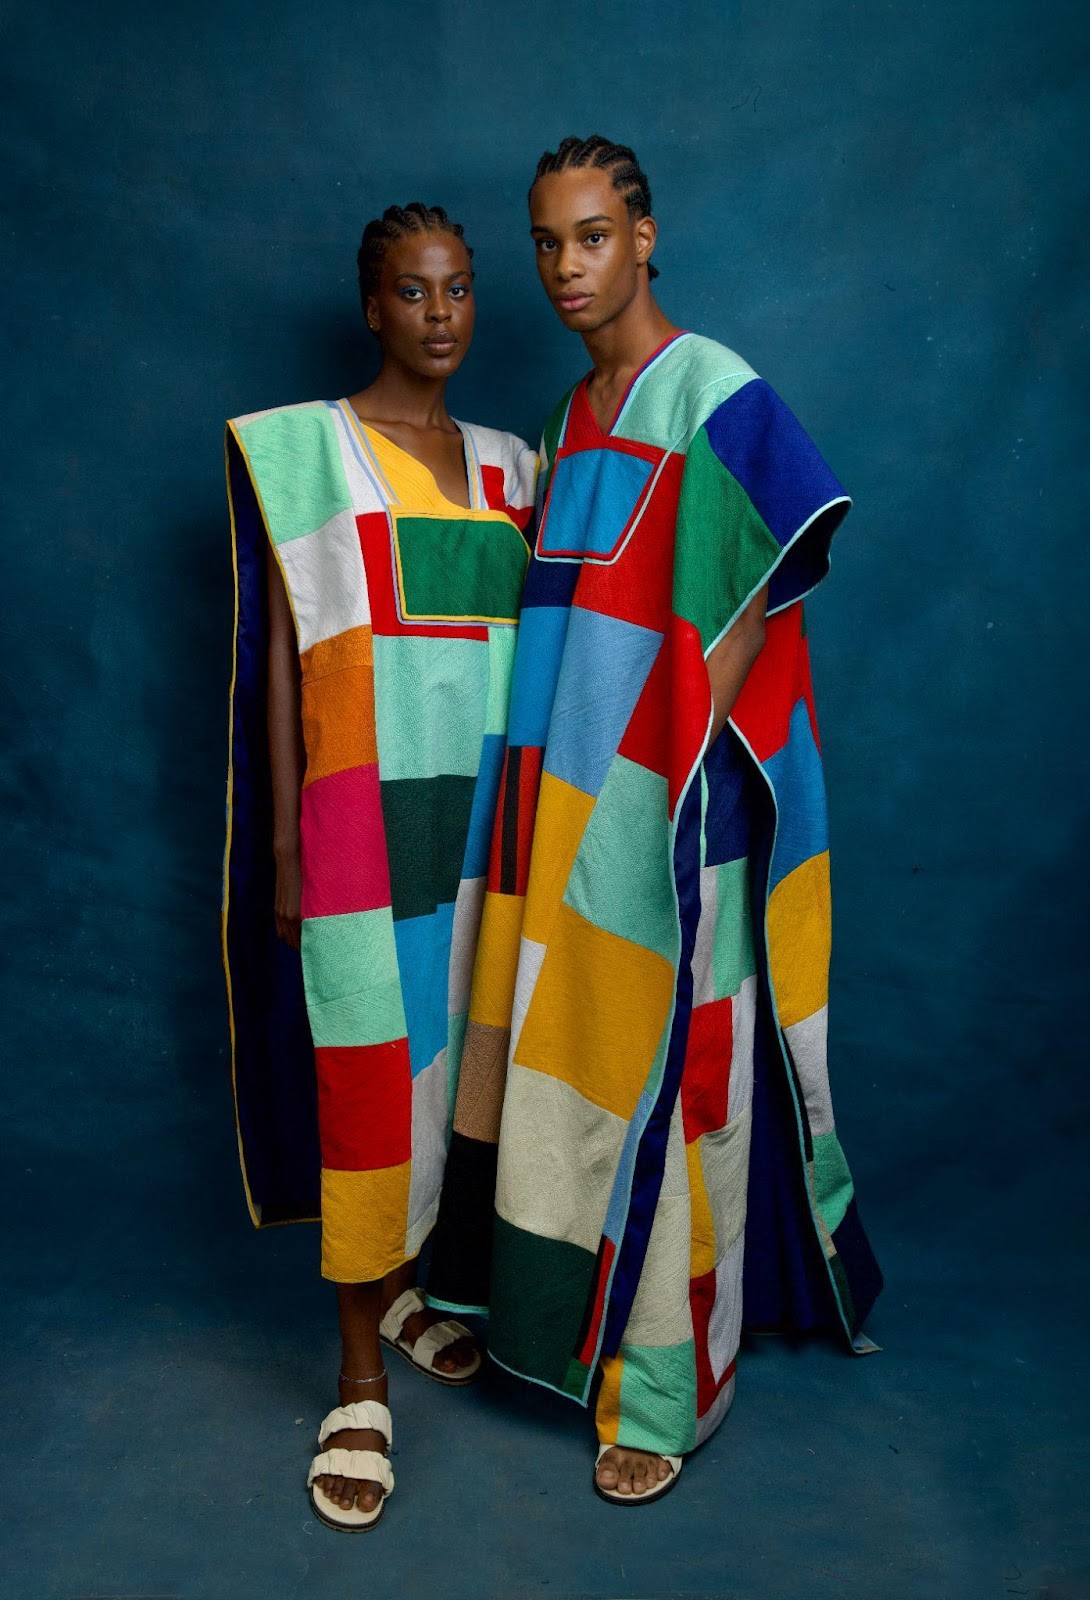 LFW24 Woven Threads: Picture of two models wearing the same African garment for the event